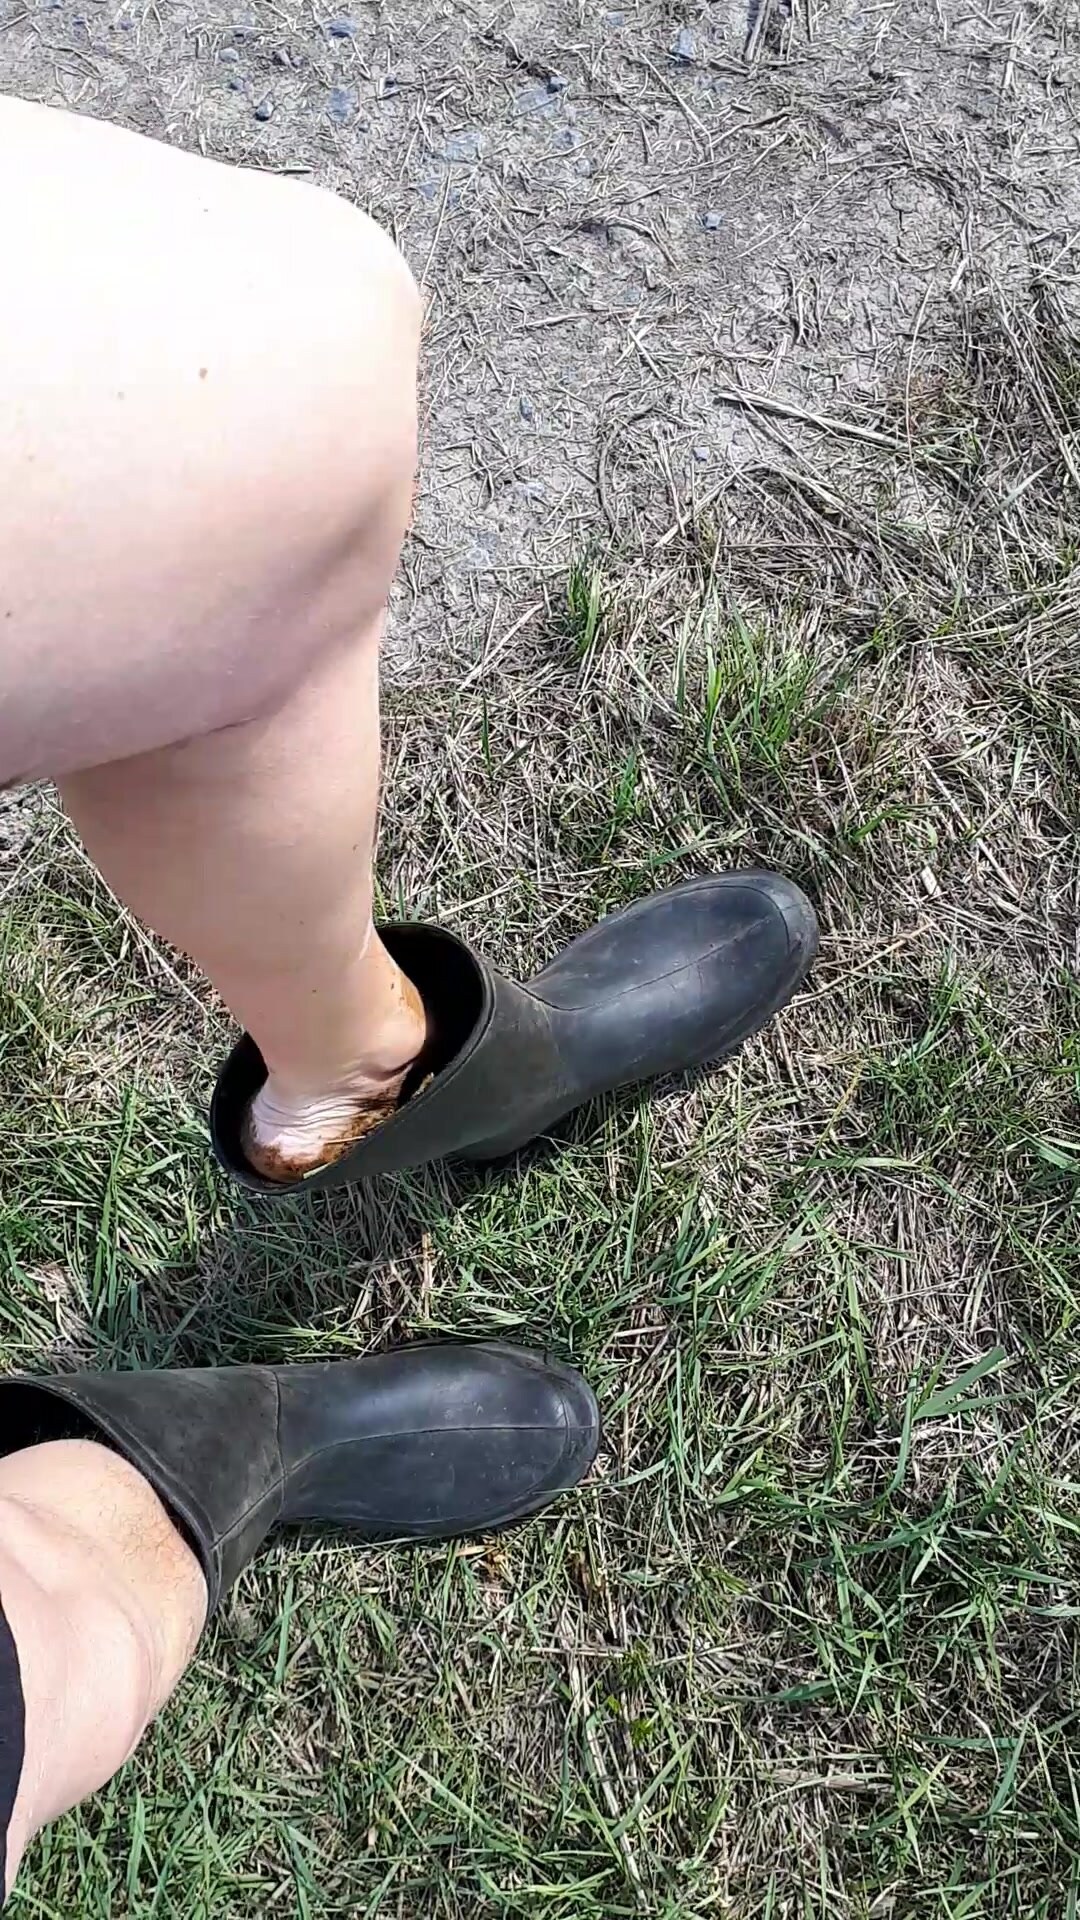 Walking in my cowshit filled rubber boots